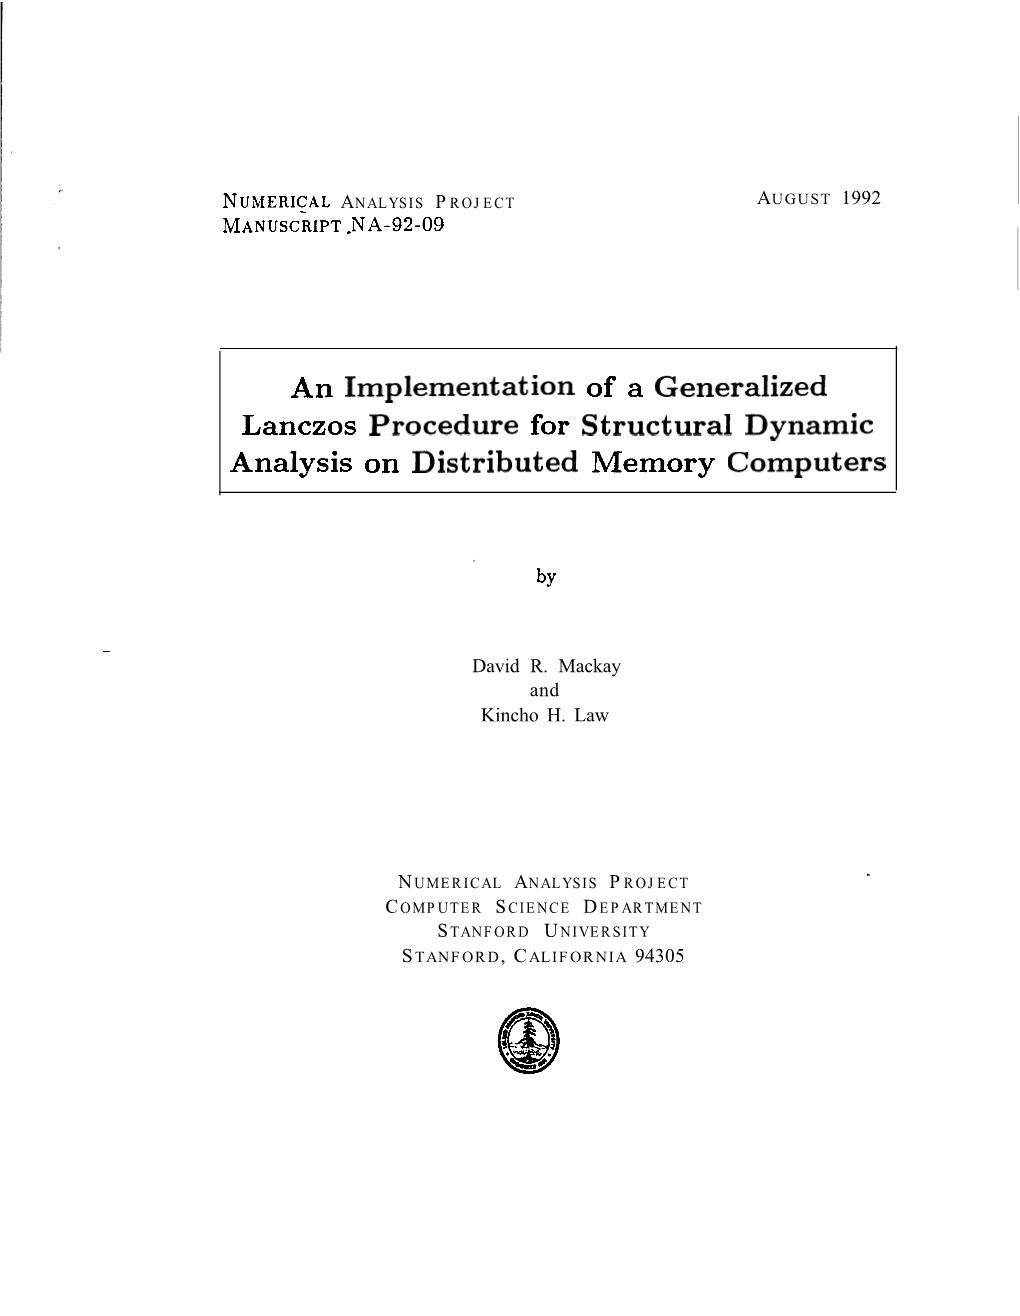 An Implementation of a Generalized Lanczos Procedure for Structural Dynamic Analysis on Distributed Memory Computers